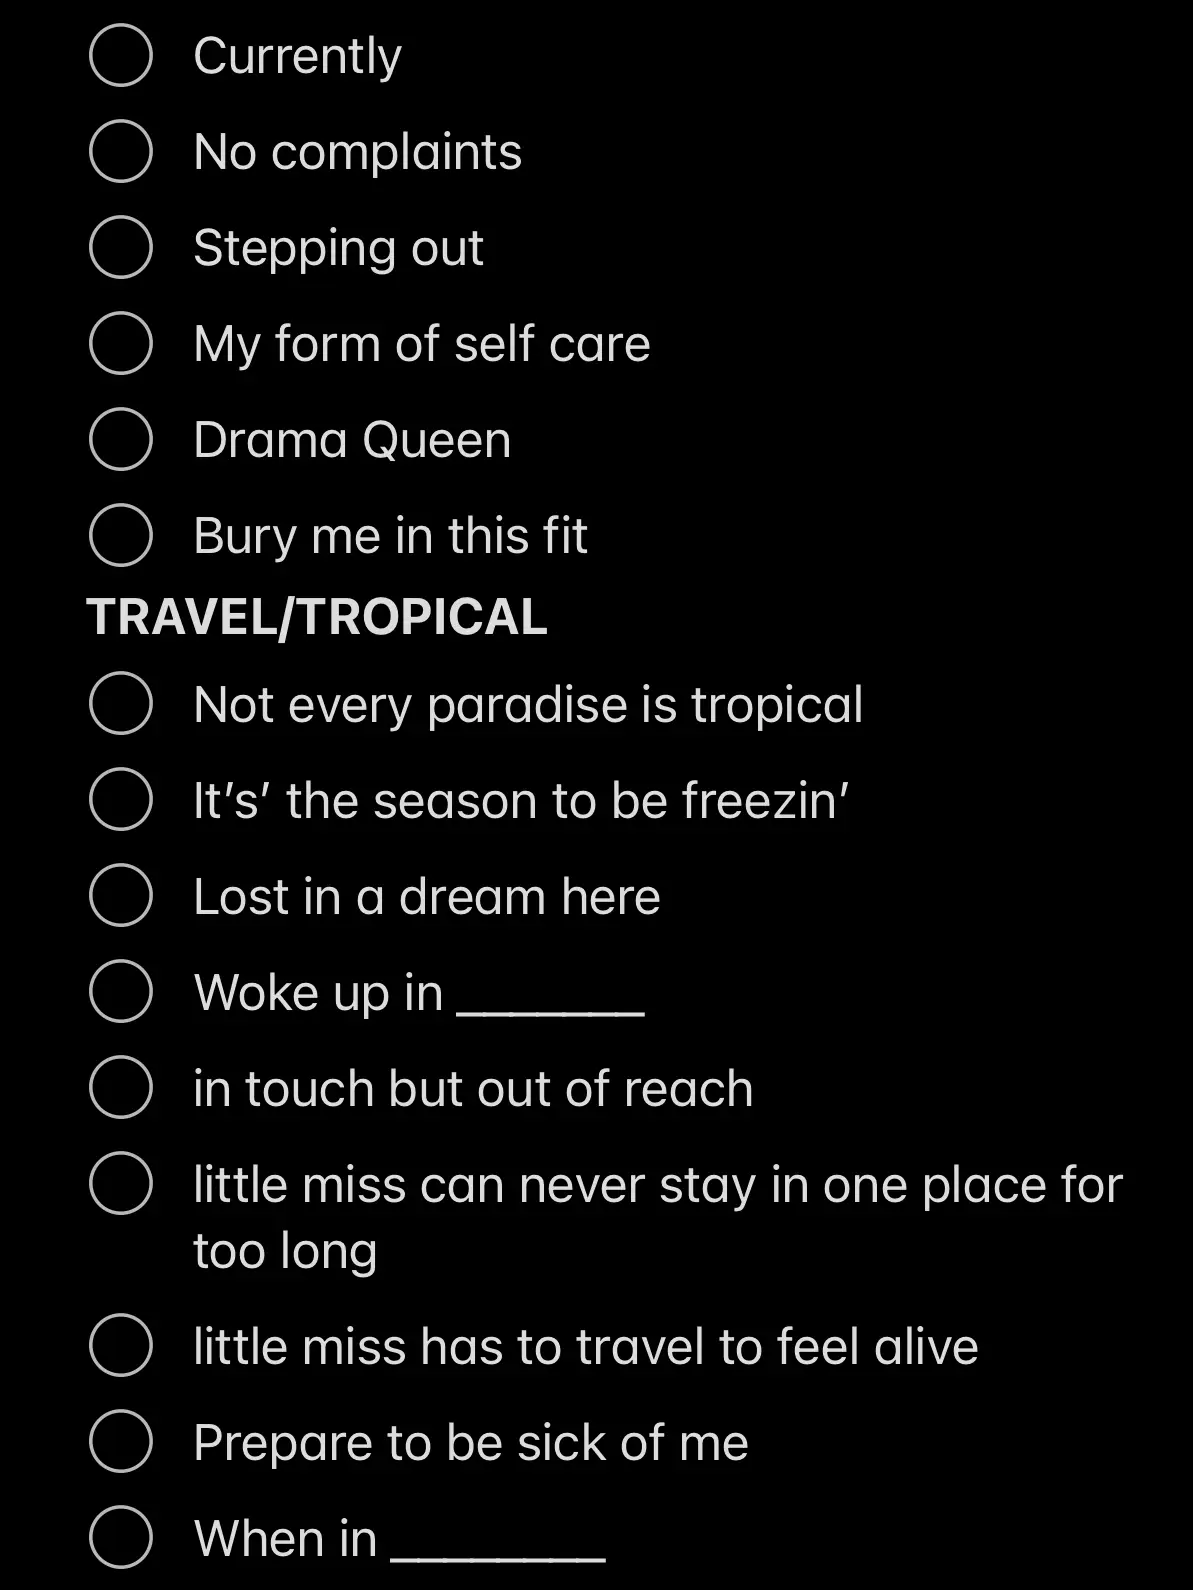  A list of self-care tips for a drama queen.